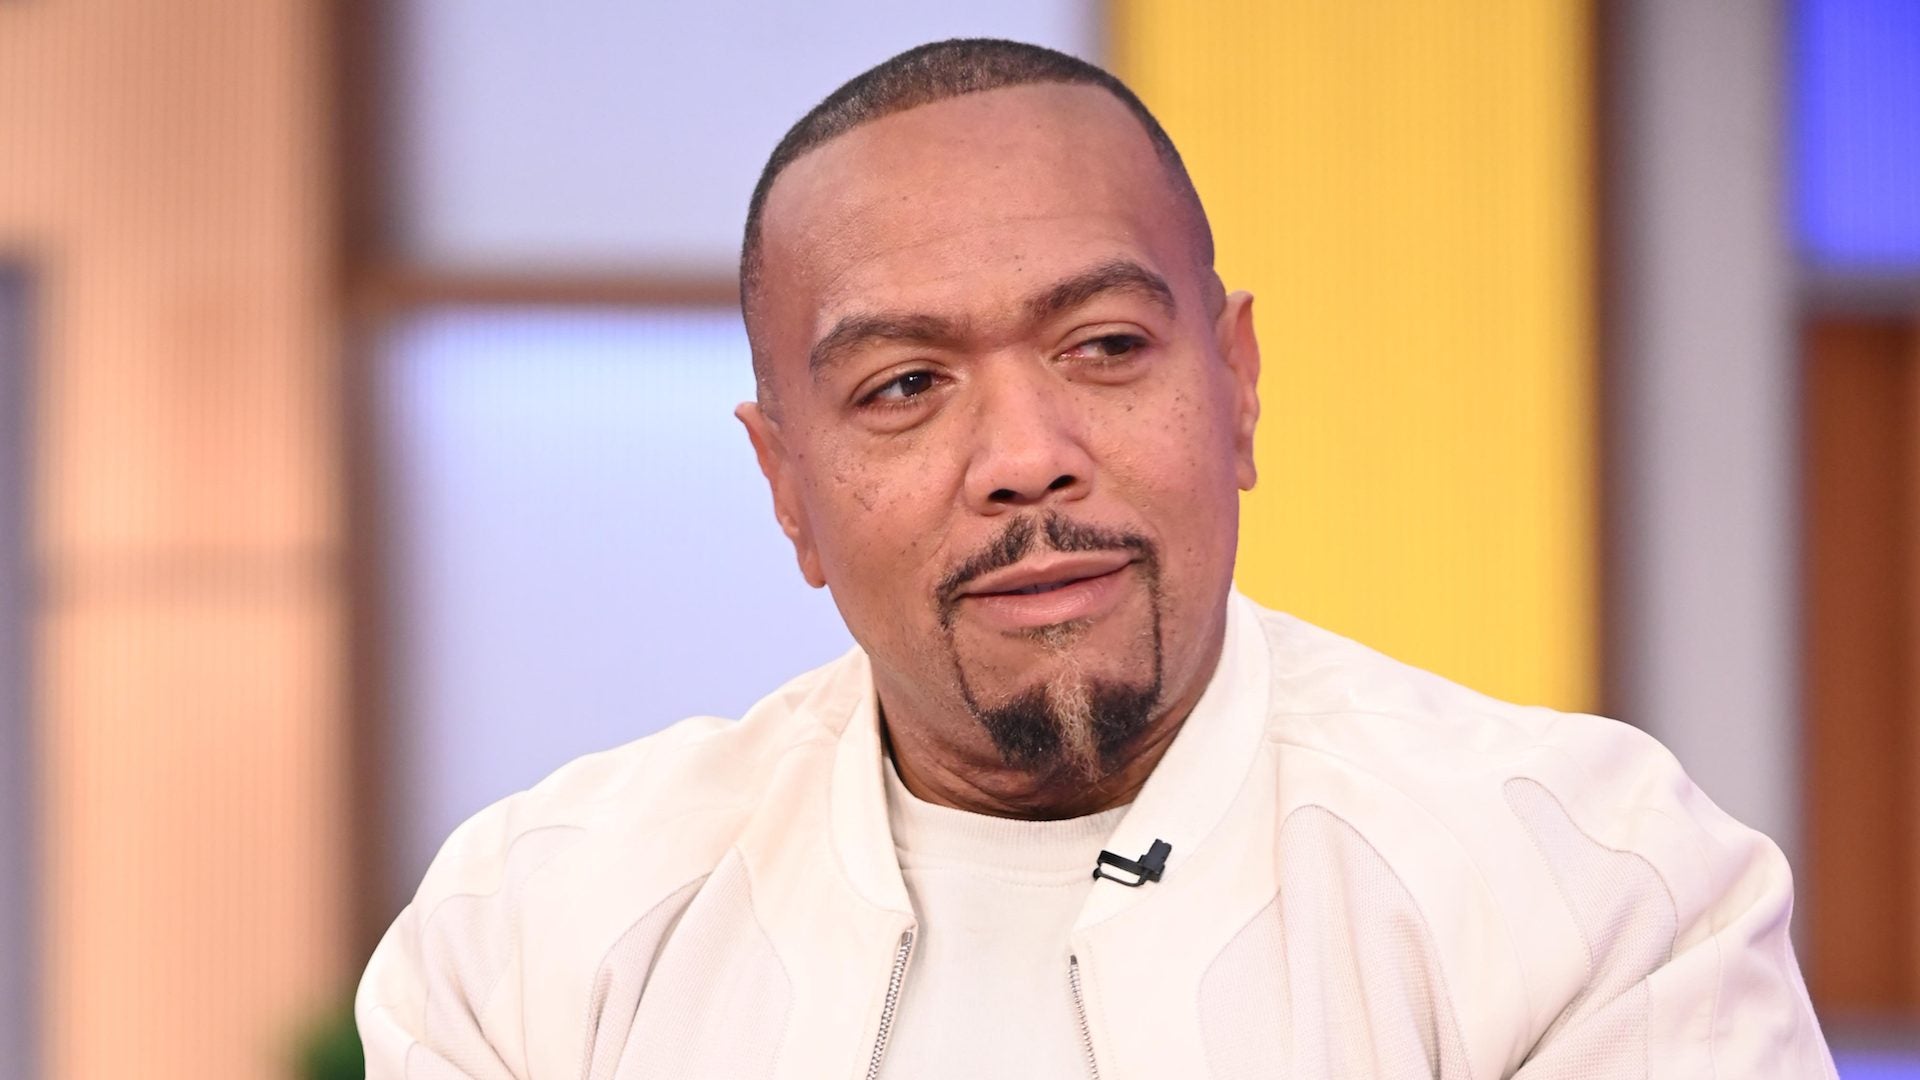 Timbaland Reveals Opioid Addiction Affected His Career: 'I Was Abusing My Gift'